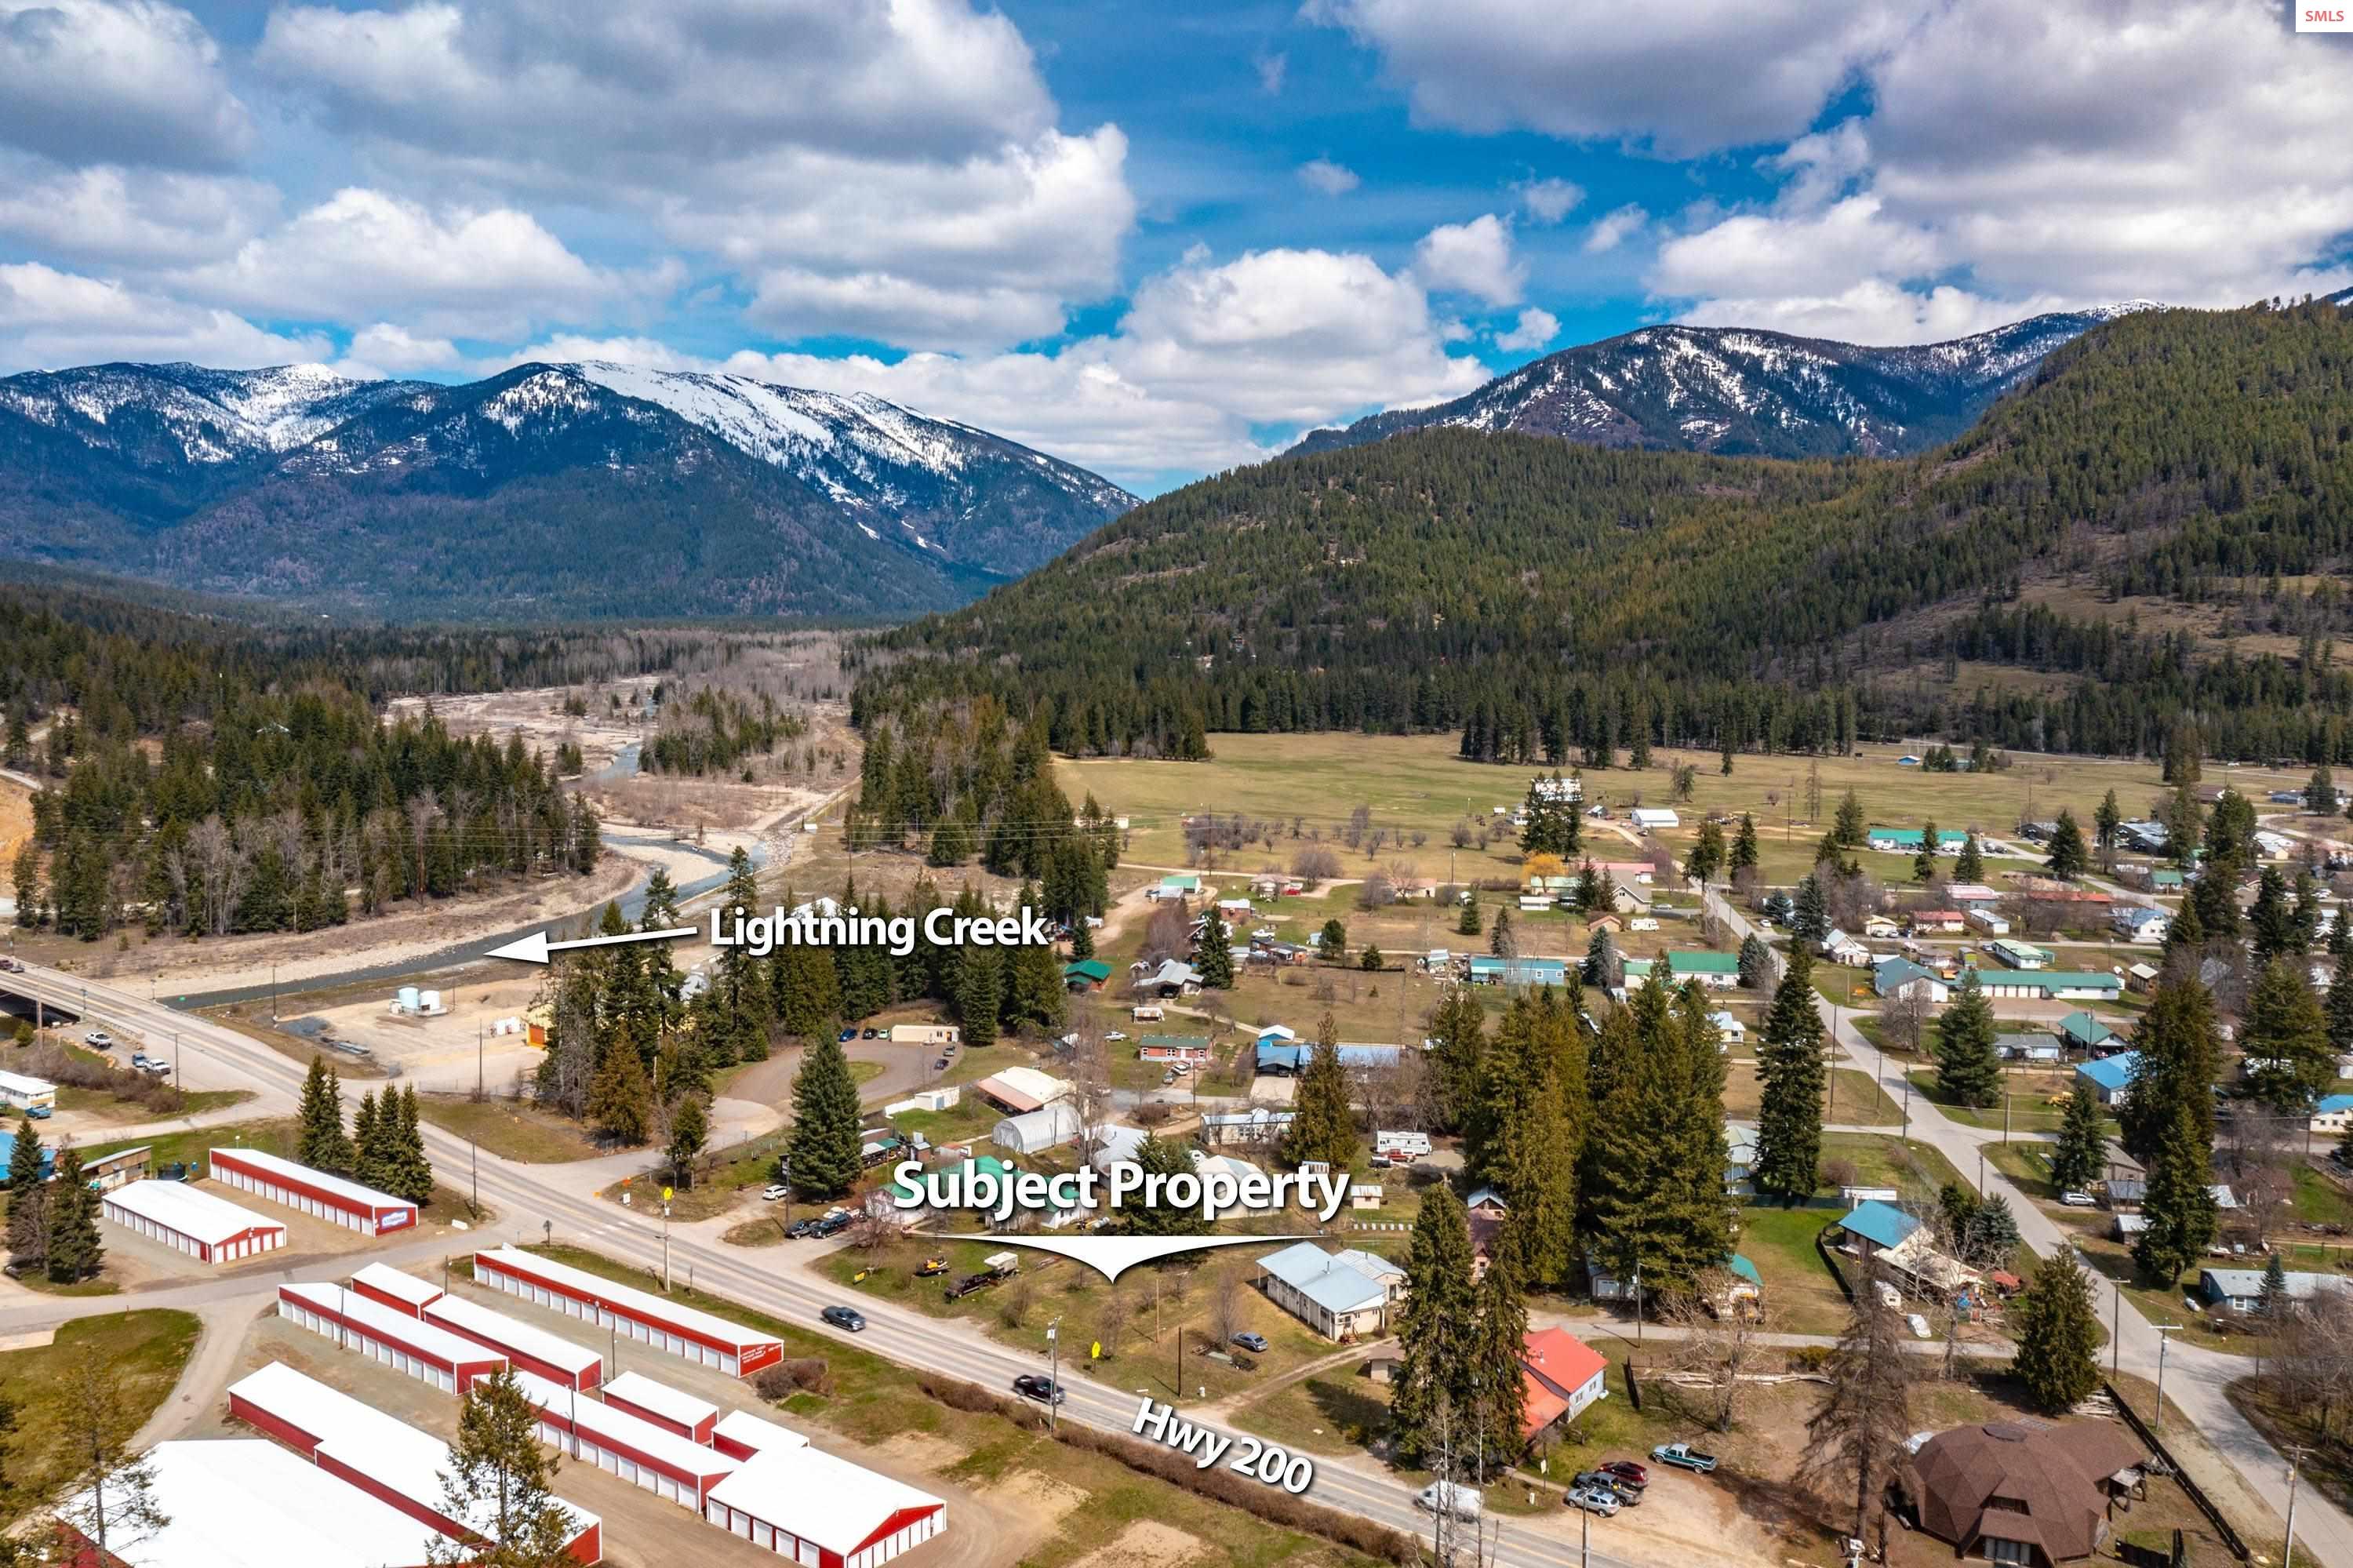 400 W 4th Ave (Highway 200), Clark Fork, ID 83811